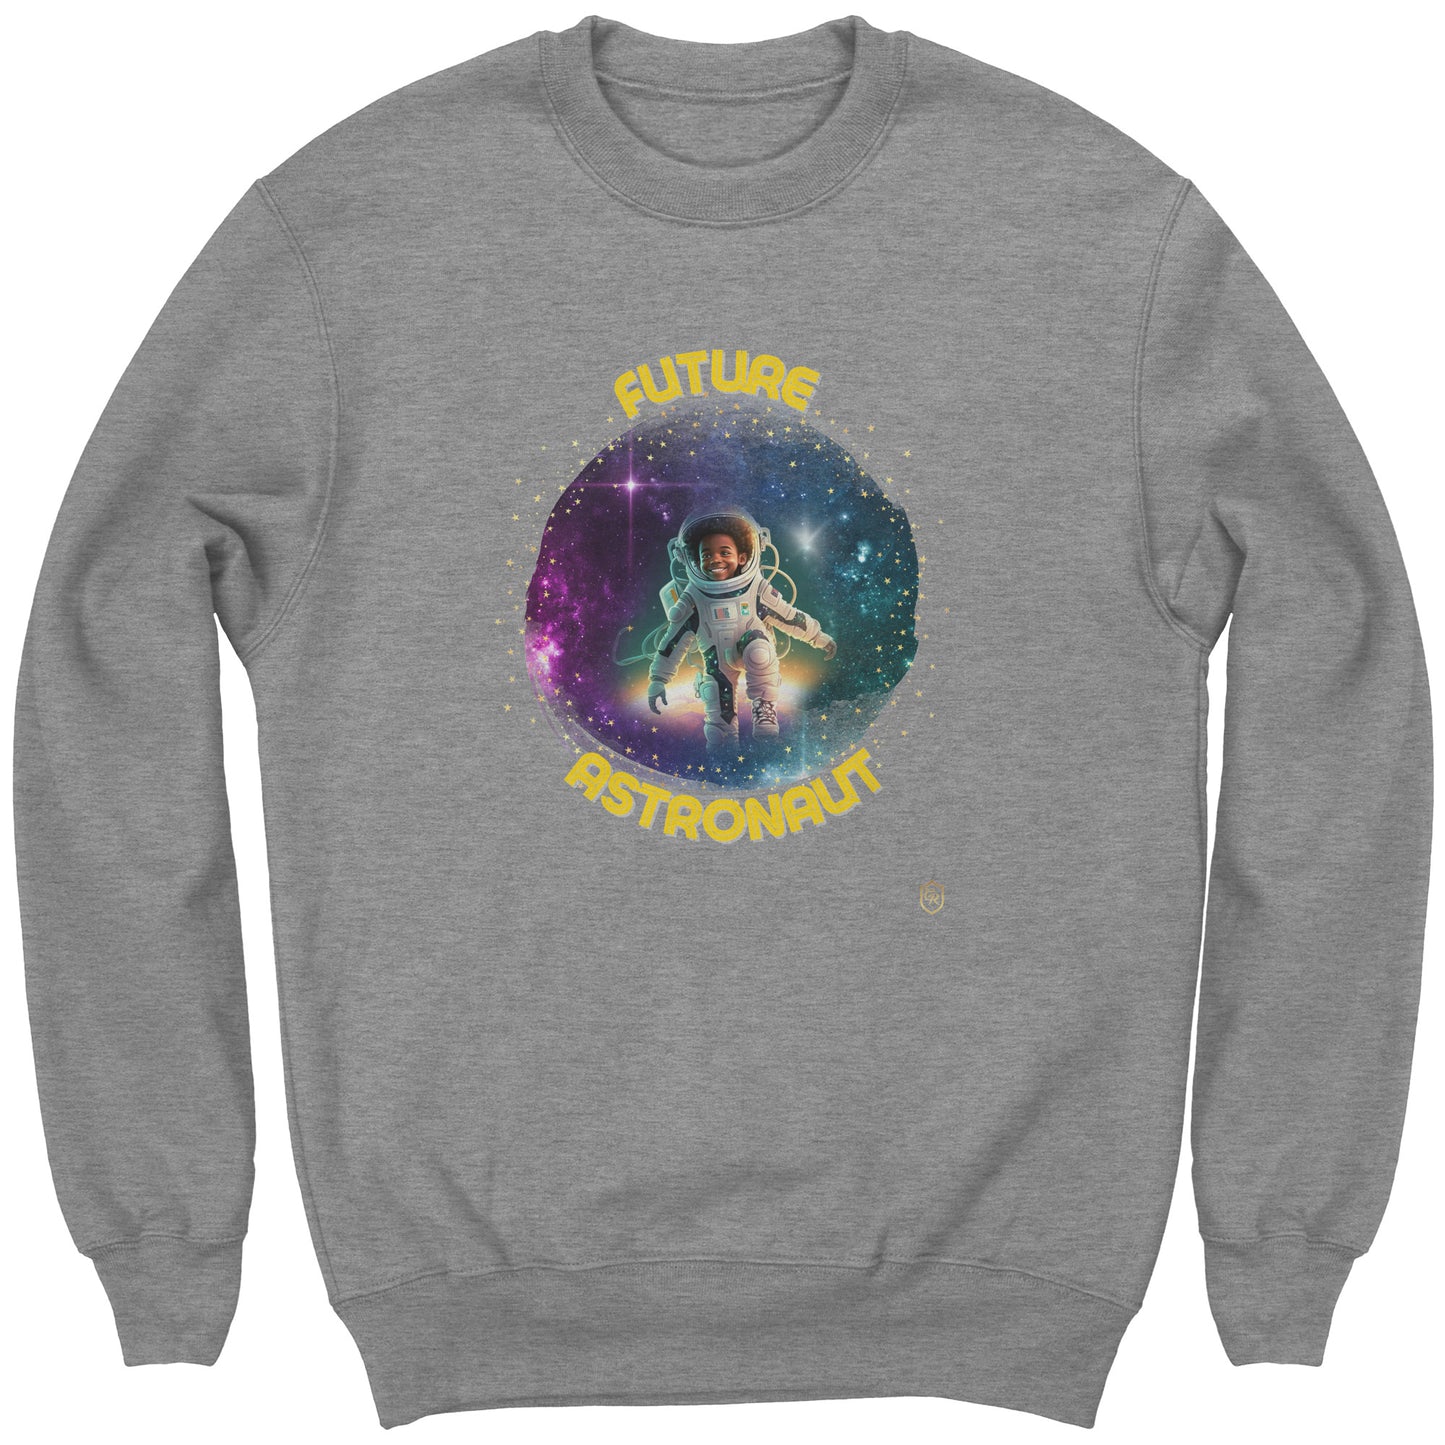 Young Boy's Galactic Explorer Sweatshirt: The Official Astronaut Gear of the Future